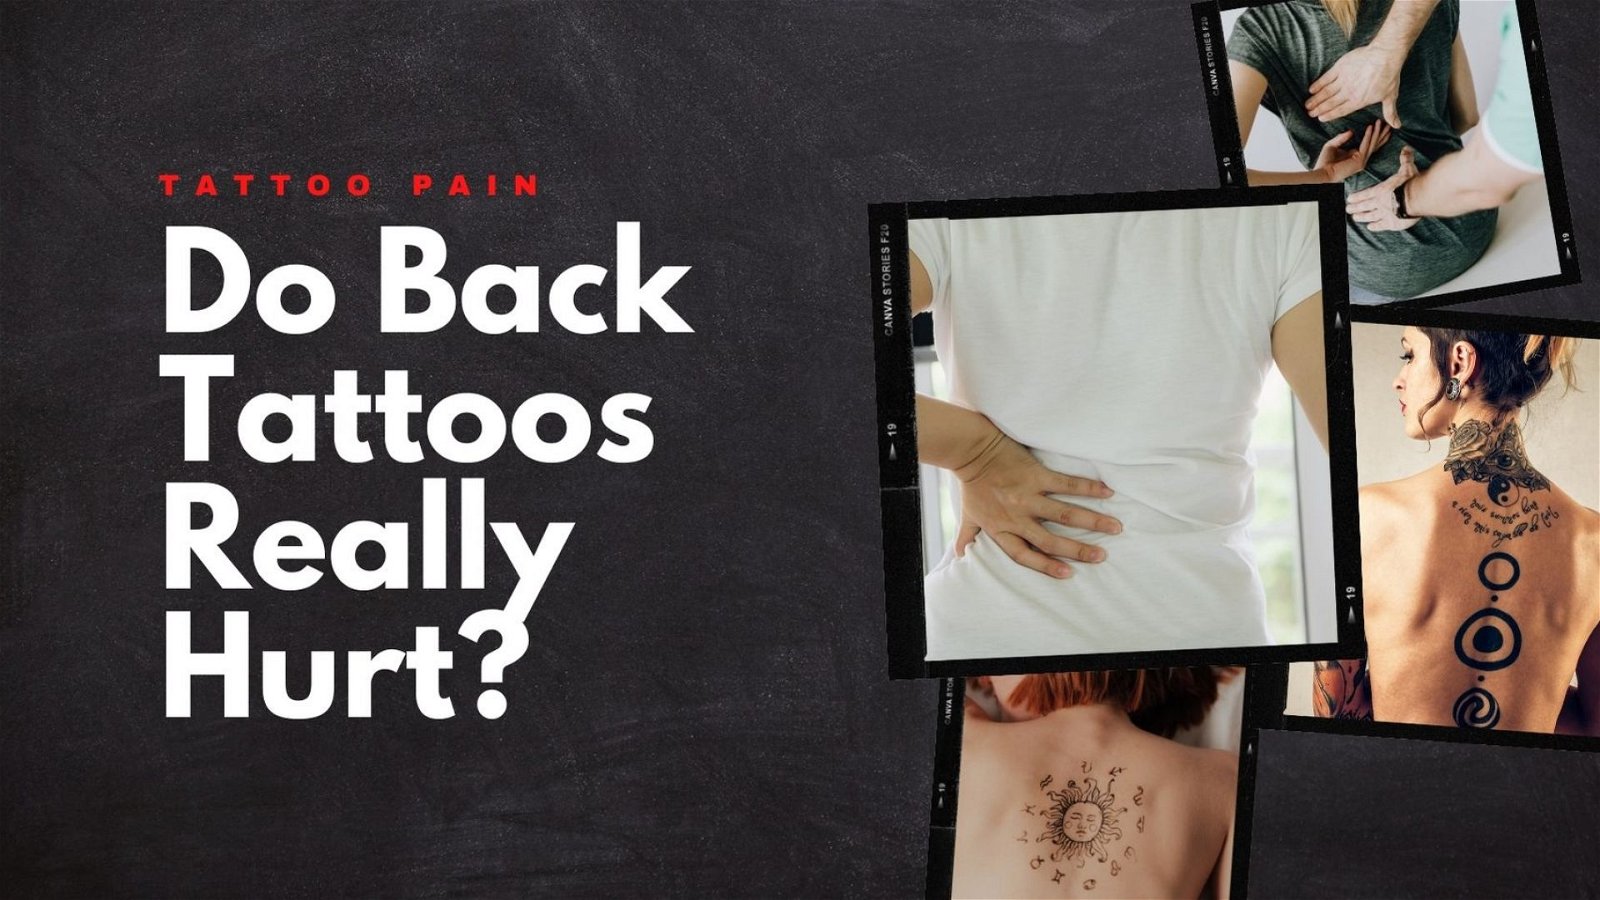 Tattoo Pain Chart: Least To Most Painful Tattoo Placements